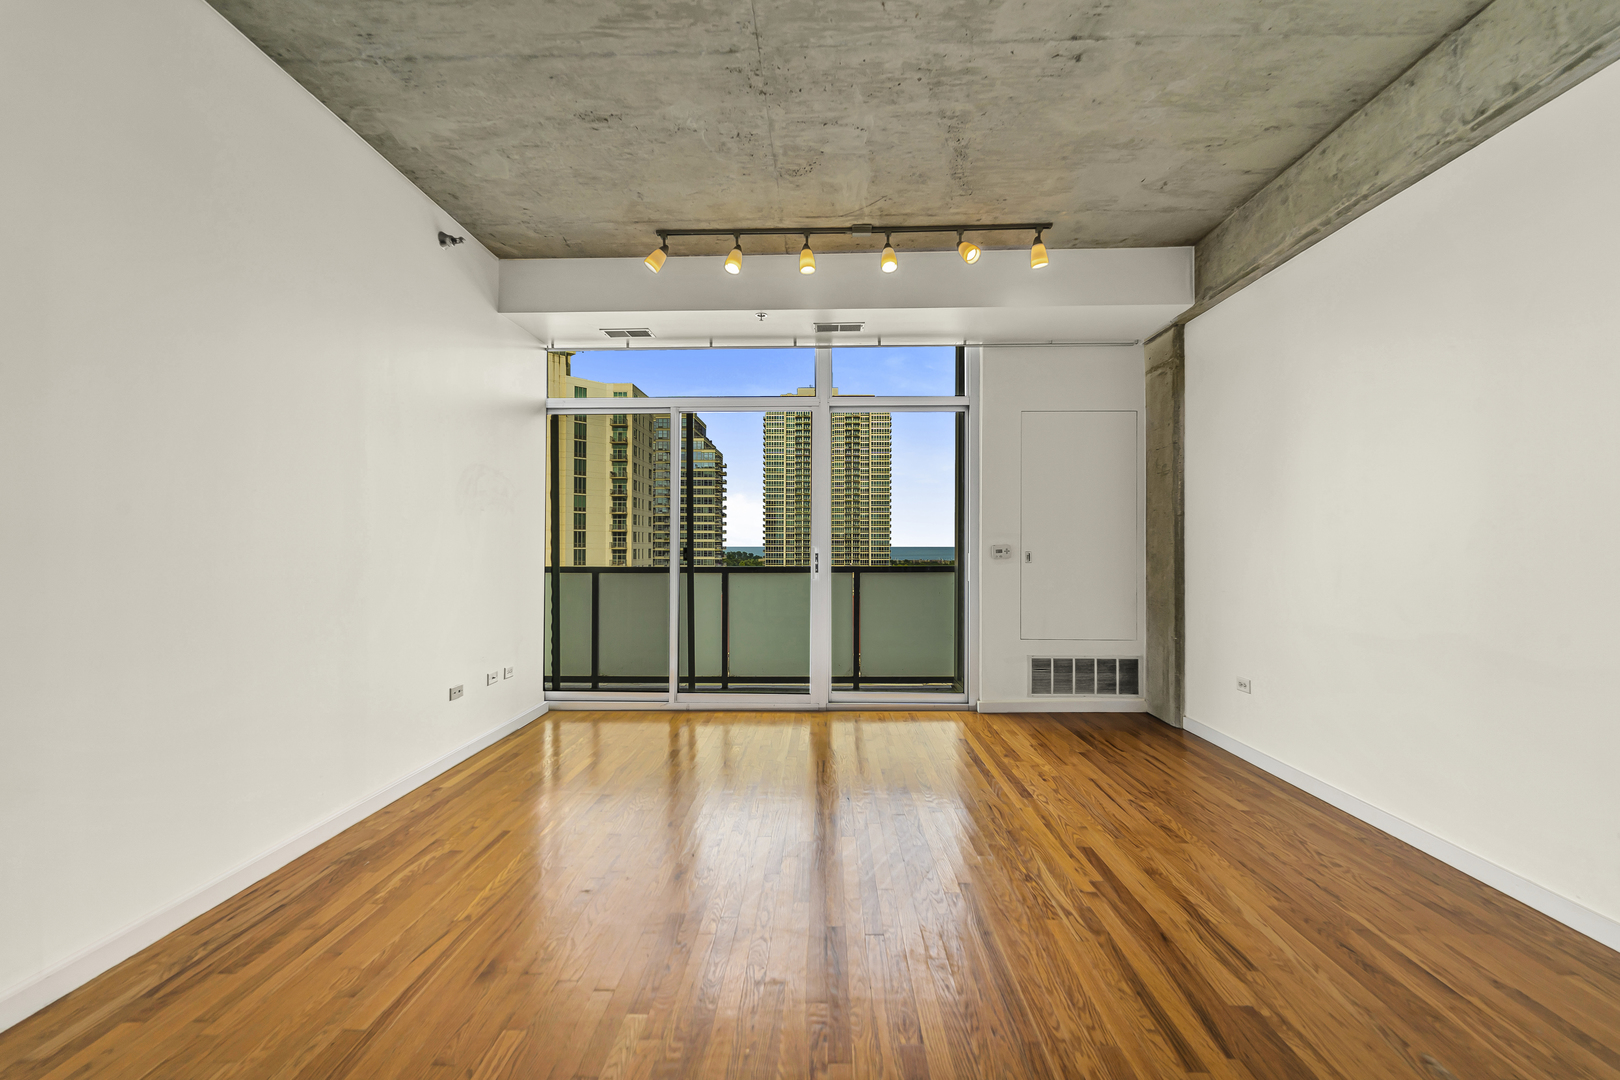 1620 S Michigan Ave Chicago, IL, 60616 - Apartments for Rent